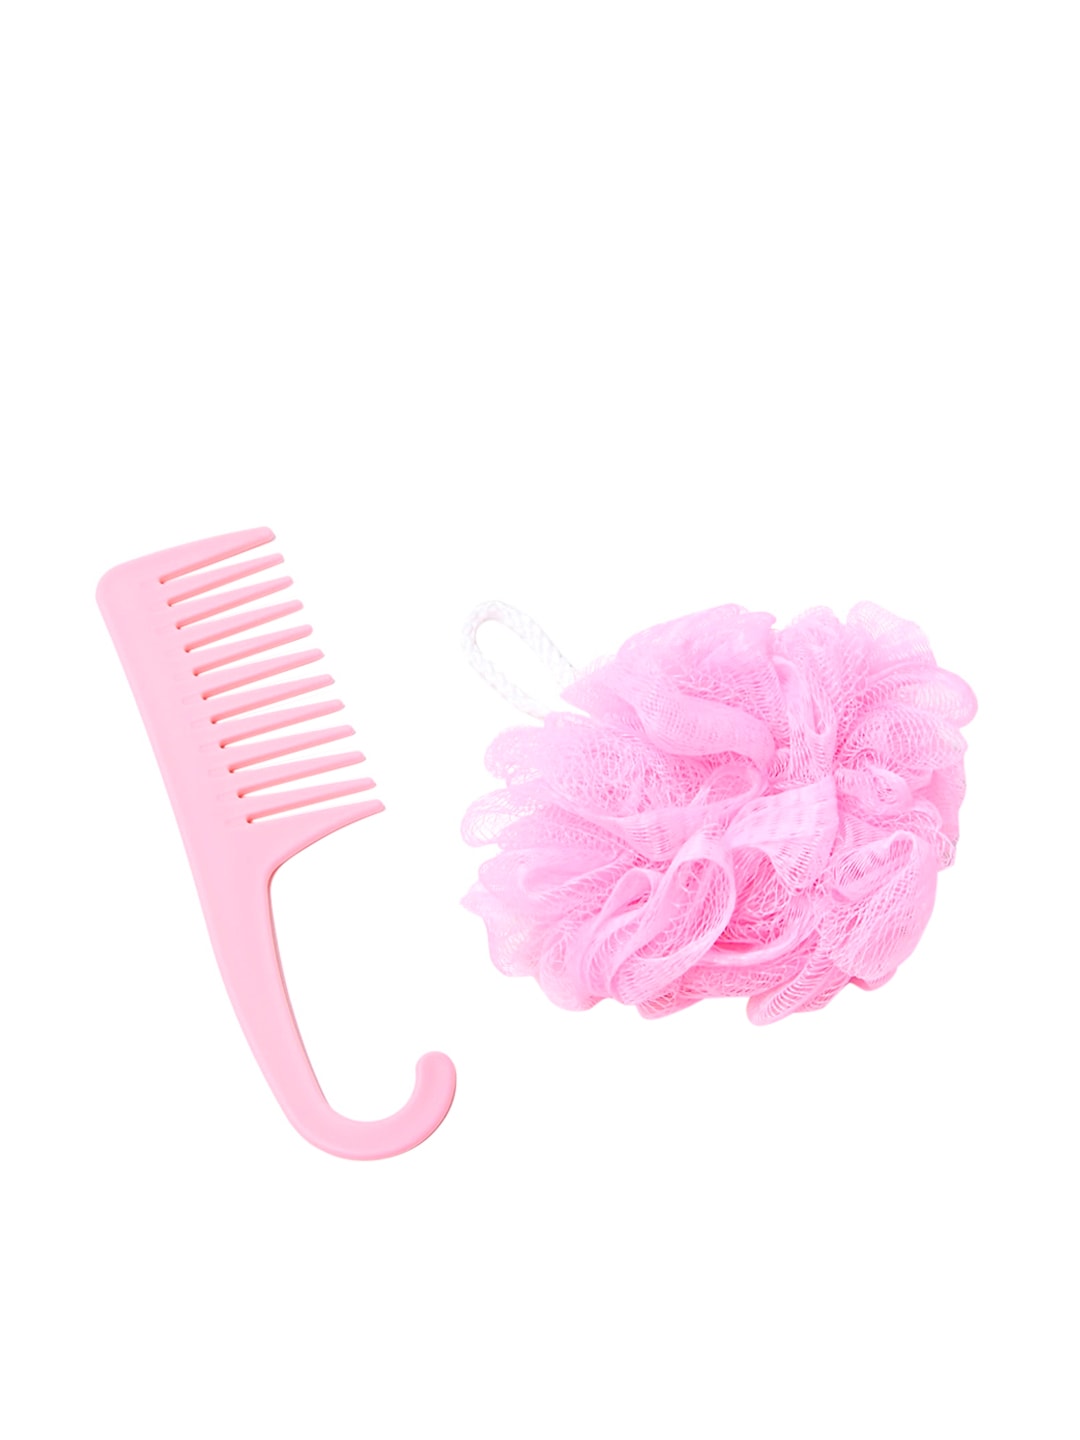 FOREVER 21 Women Pink Loofah & Comb Set Price in India